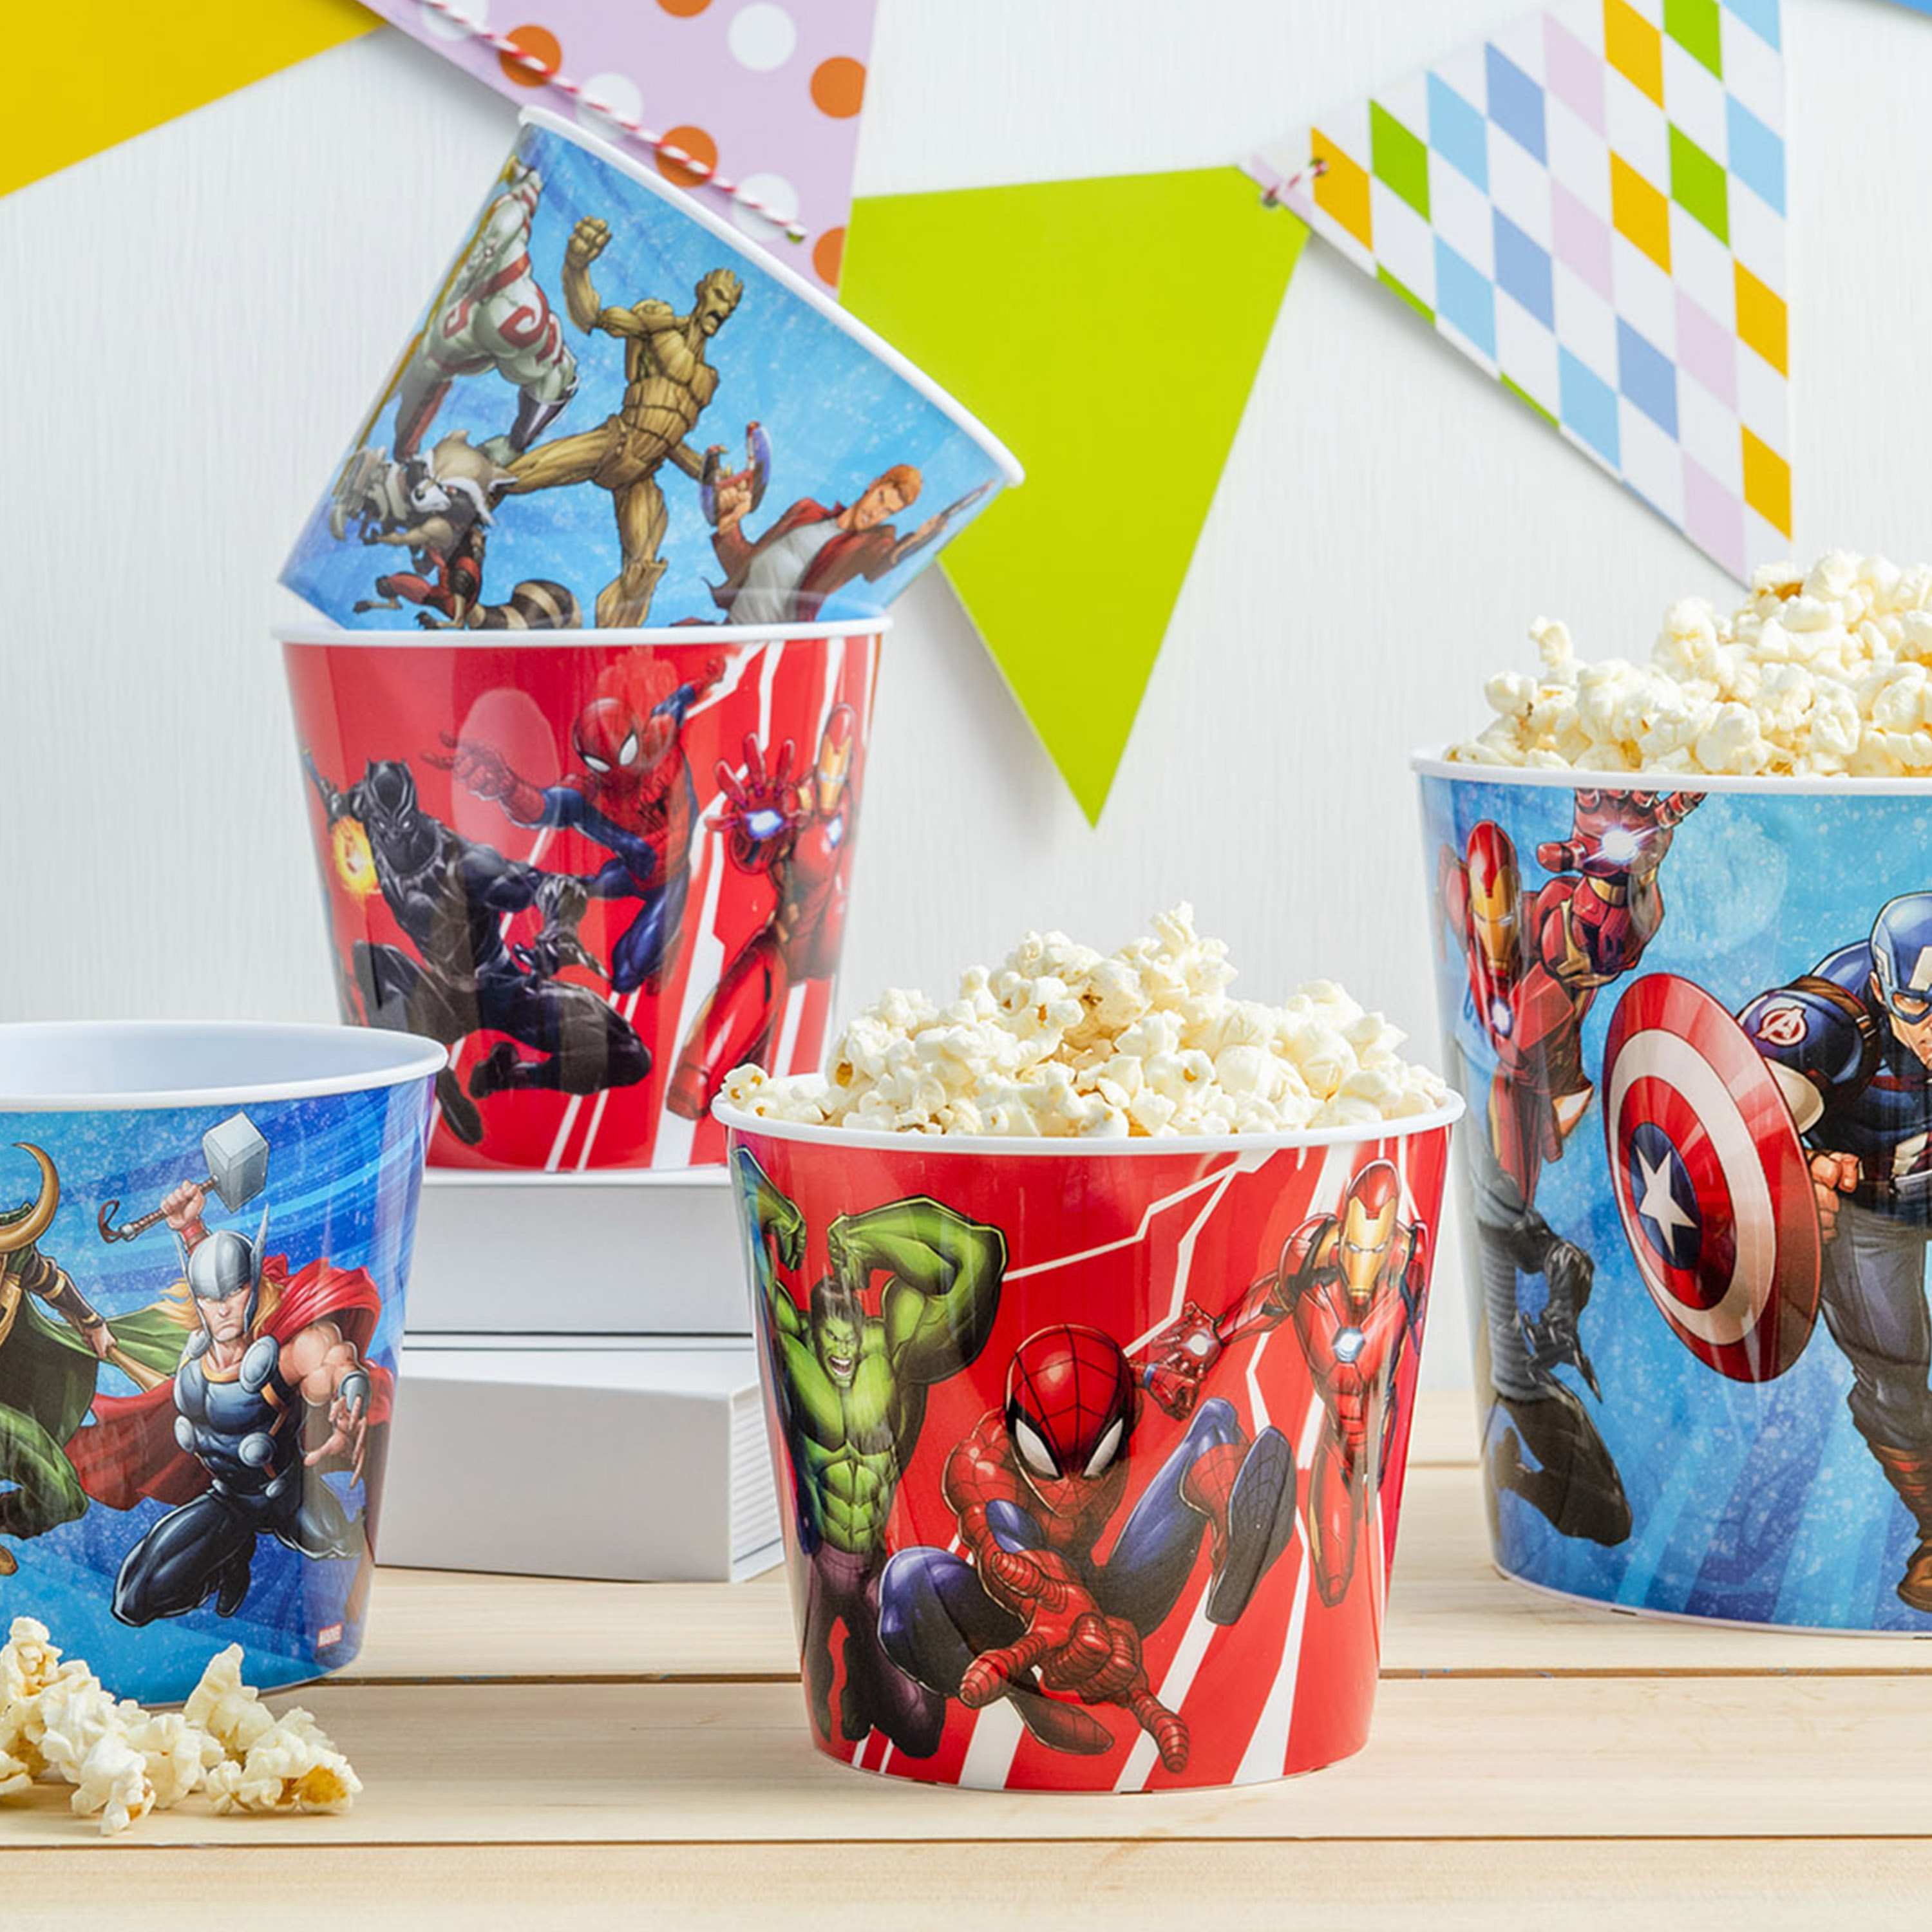 Marvel Comics Plastic Popcorn Container and Bowls, The Hulk, Spider-Man and More, 5-piece set slideshow image 3